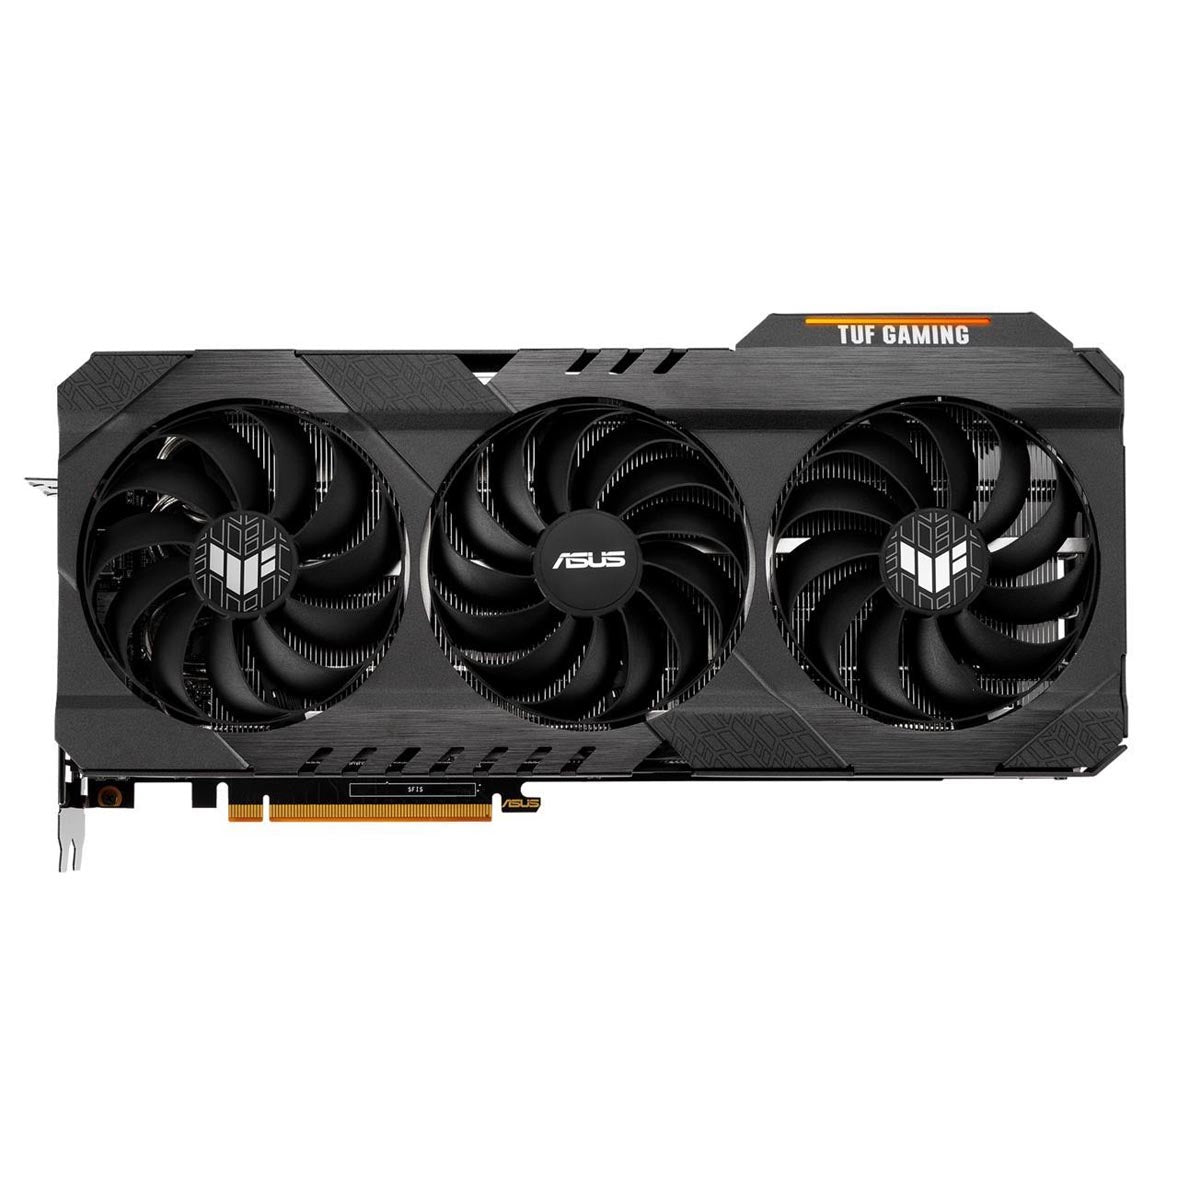 ASUS TUF Gaming Radeon RX 6800 XT Graphics Card 16GB OC Edition GDDR6 256-Bit with RDNA 2 Architecture